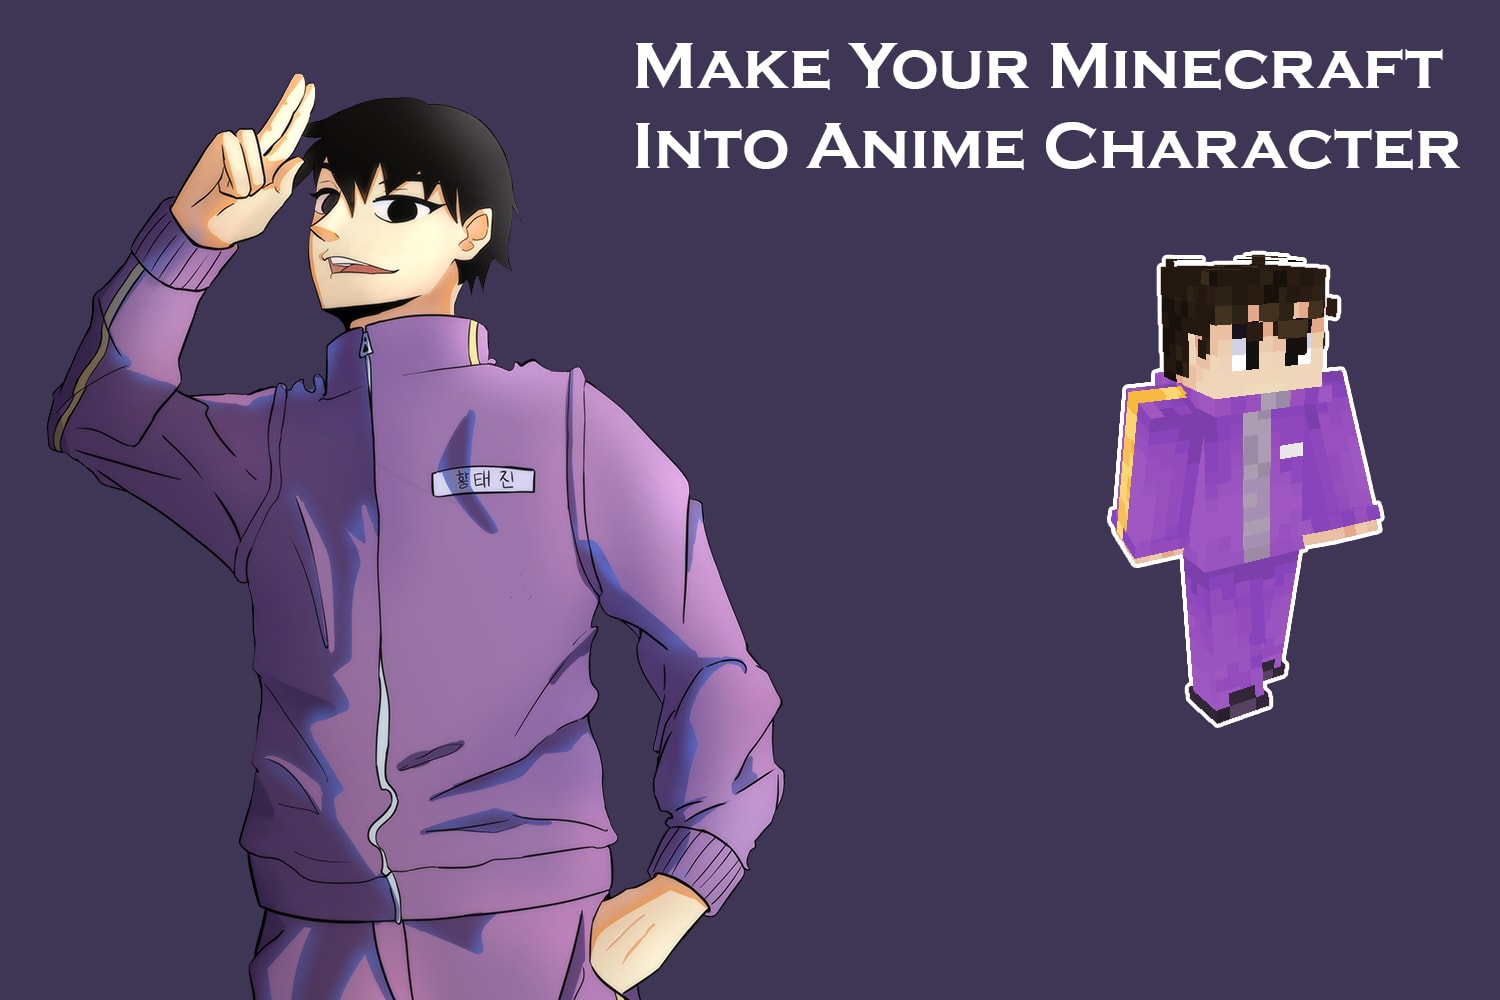 Draw your minecraft skin, roblox avatar into anime style by